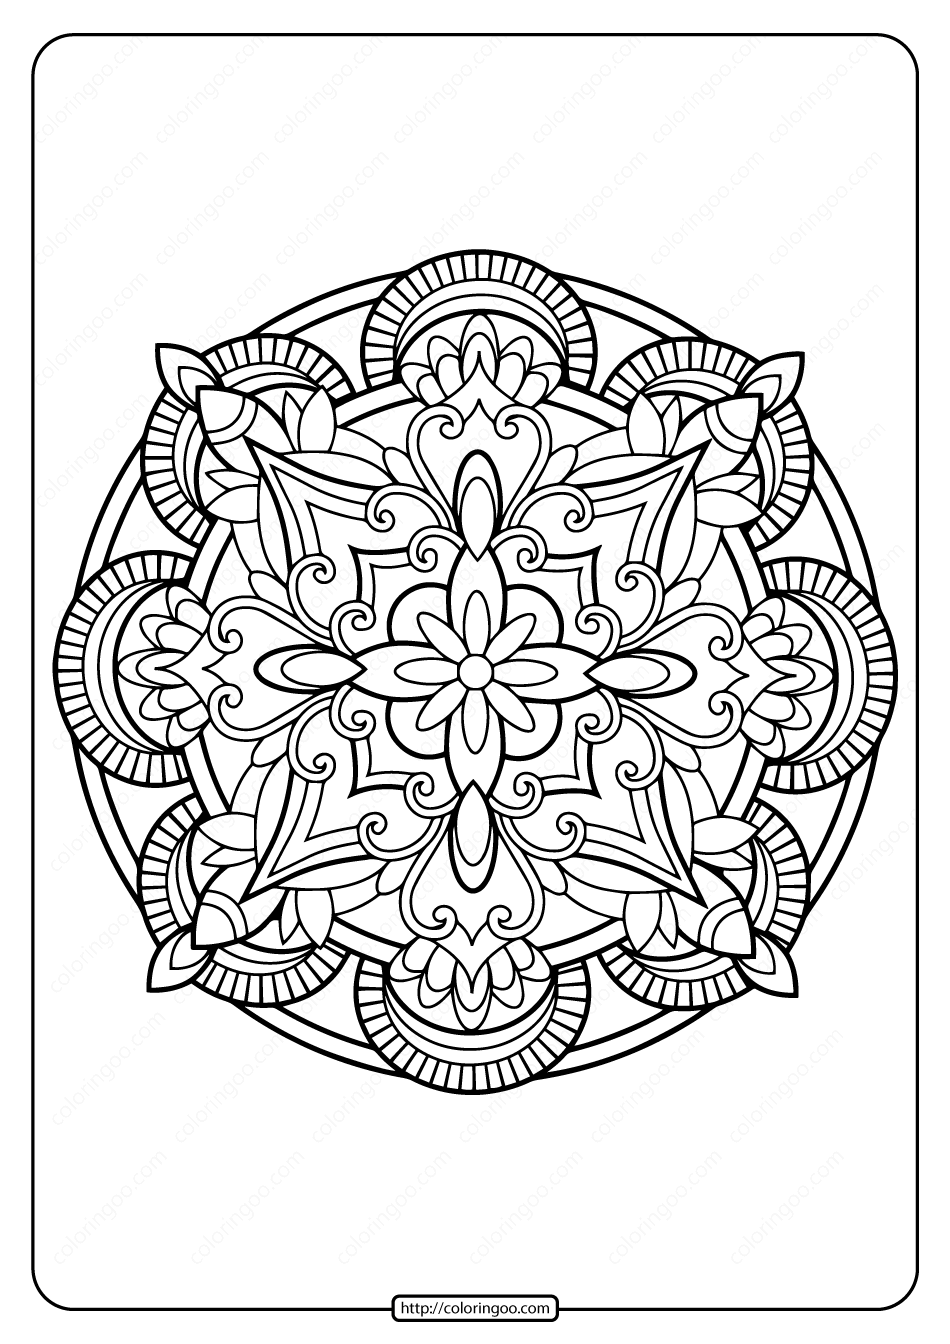 55+ Adult Coloring Pages Finished to Perfection - #7 is Stunning 160